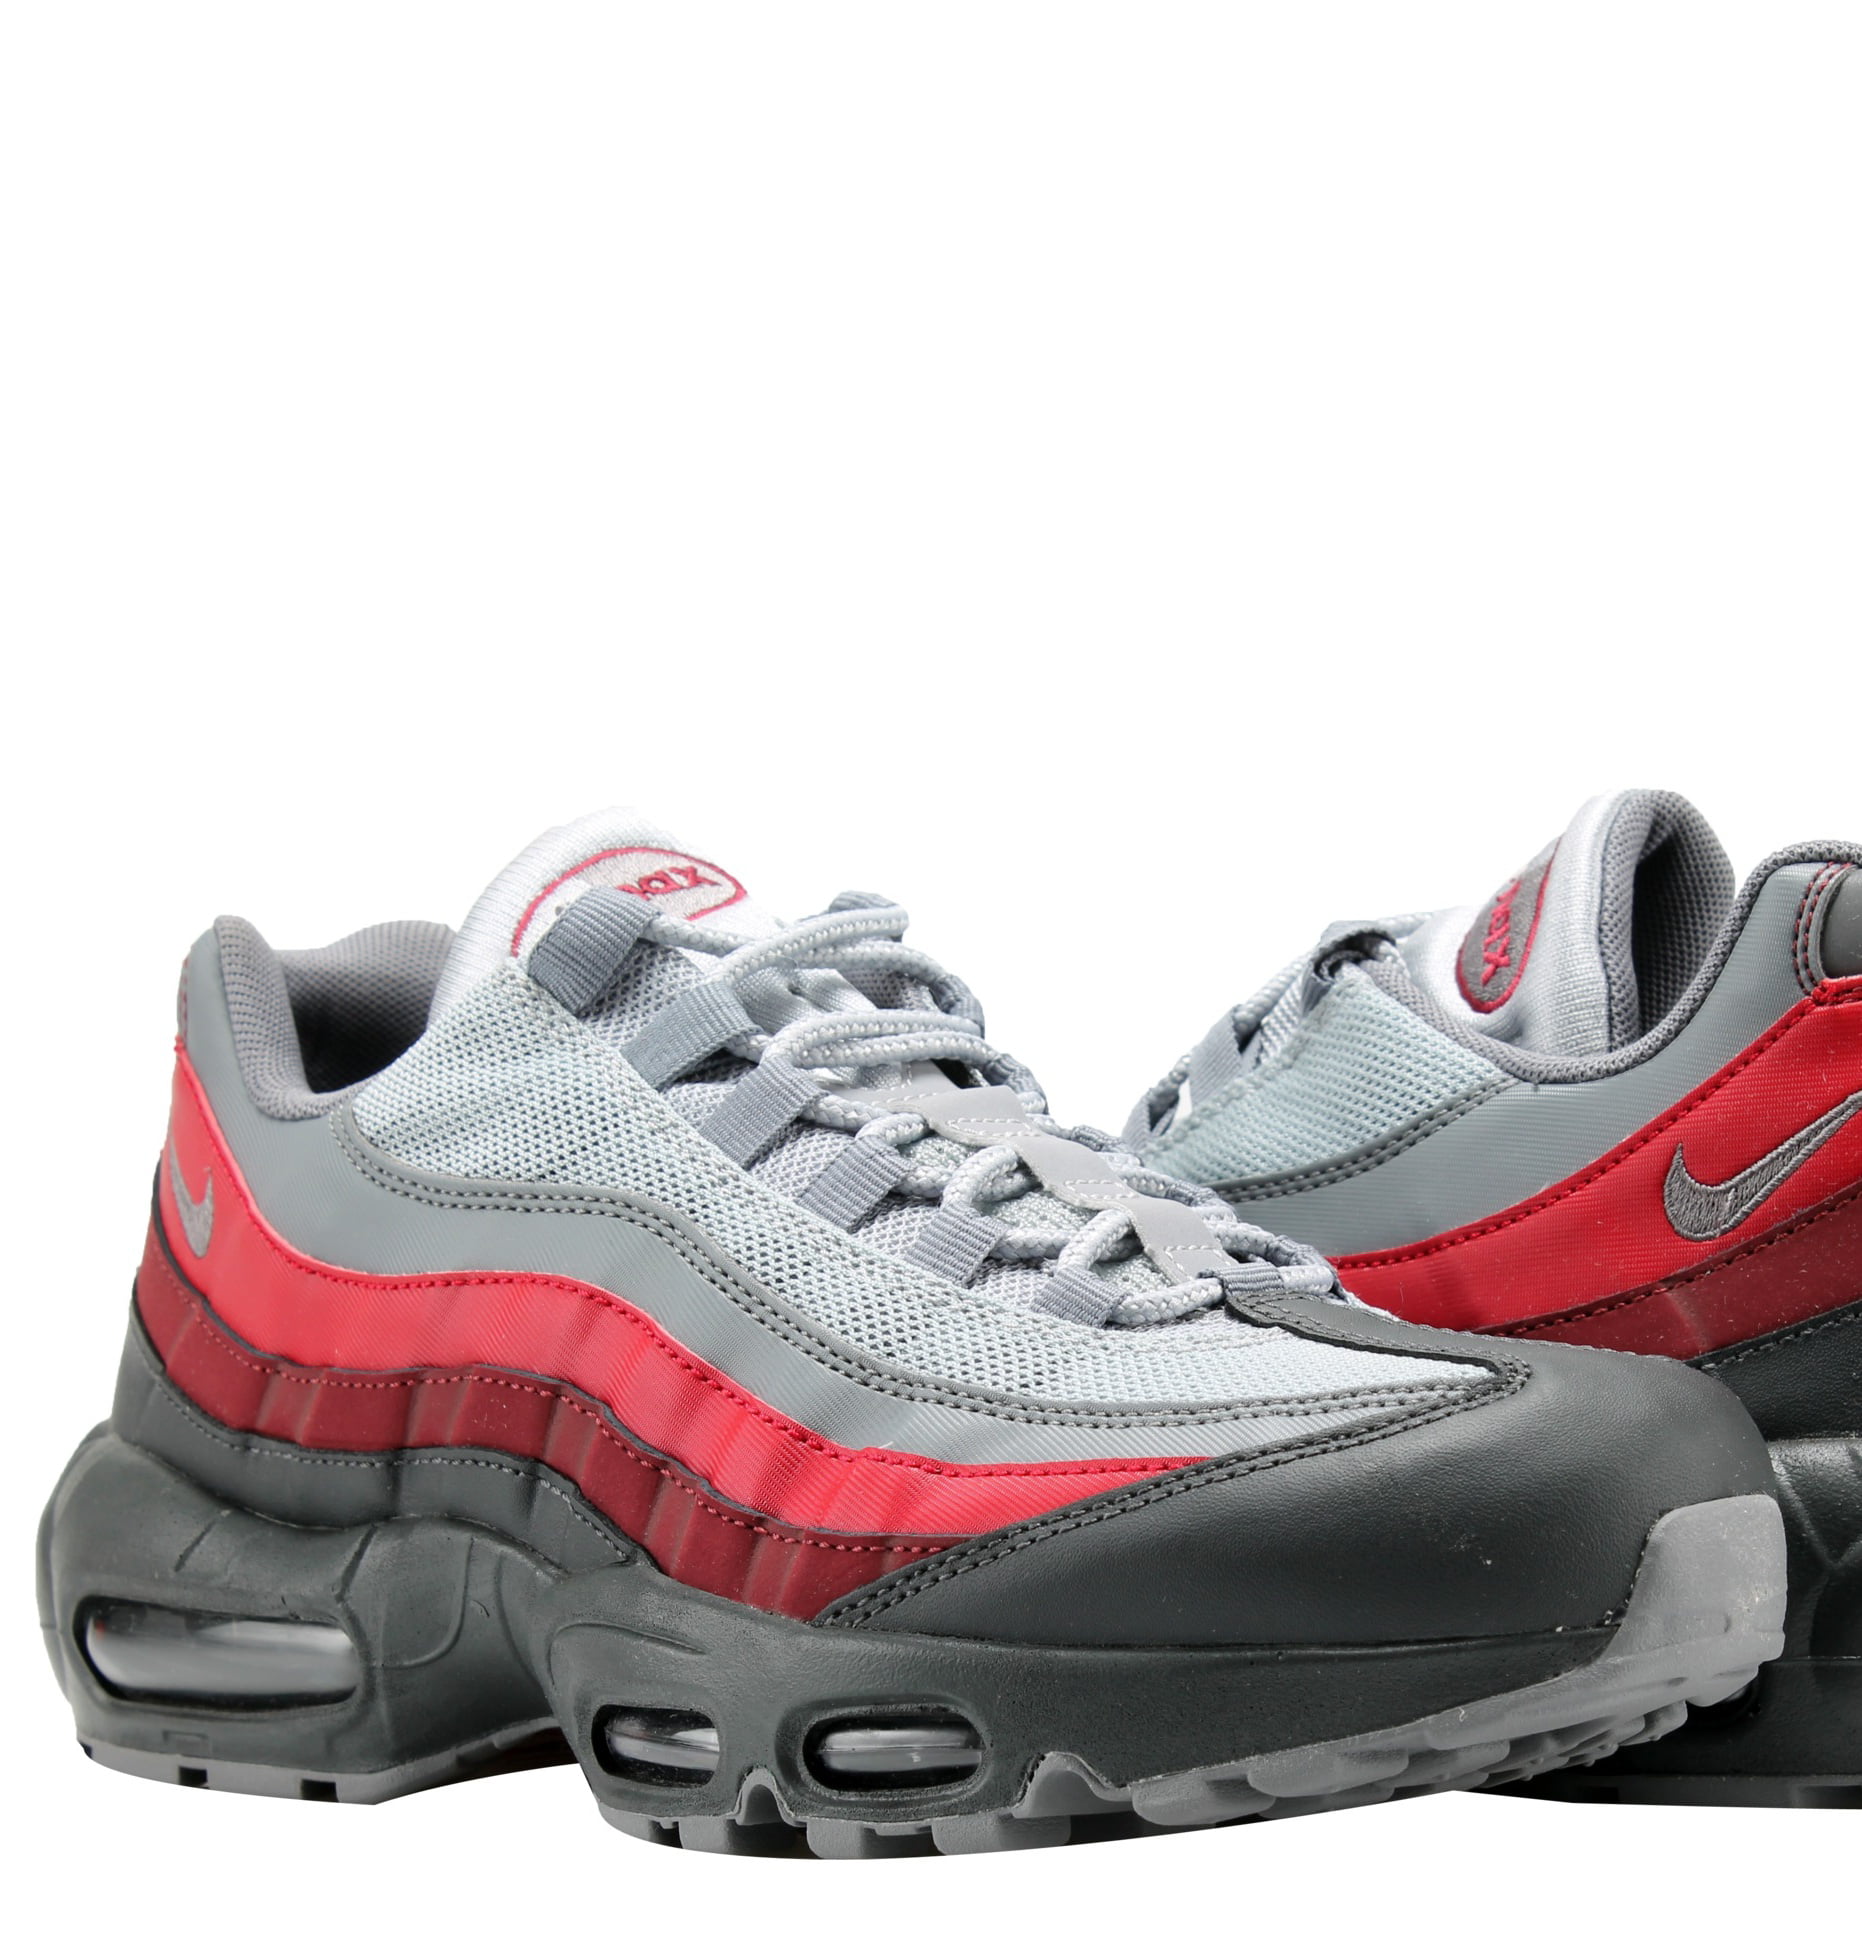 Nike - Nike Air Max 95 Essential Anthracite/Grey-Red Men's Running